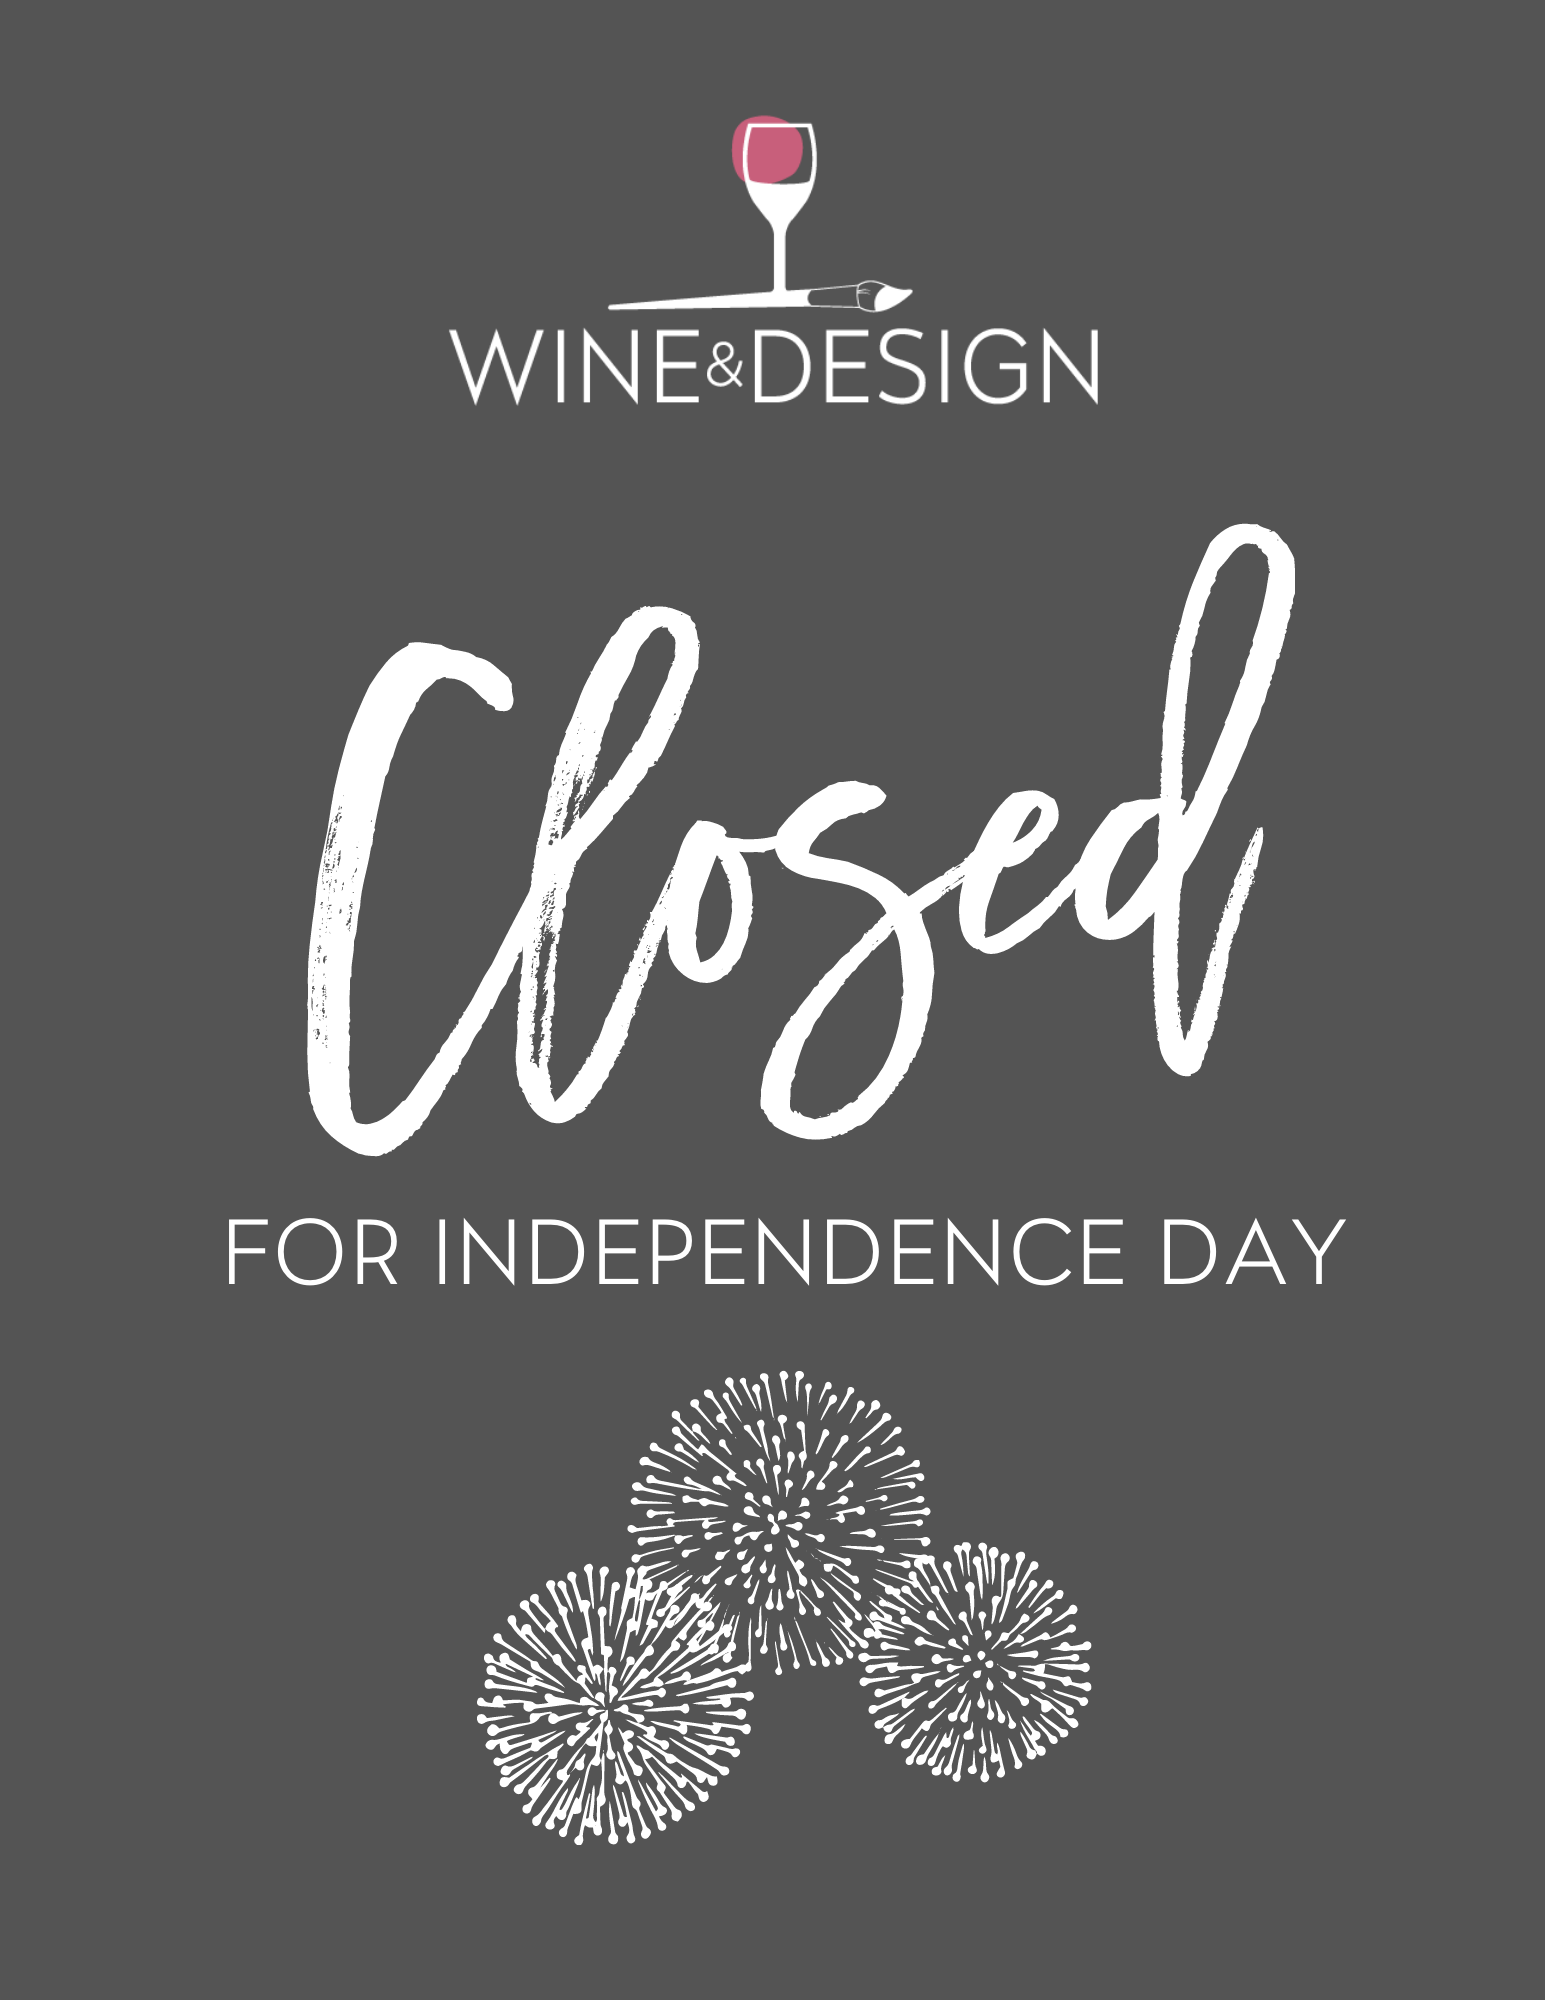 CLOSED FOR 4th OF JULY